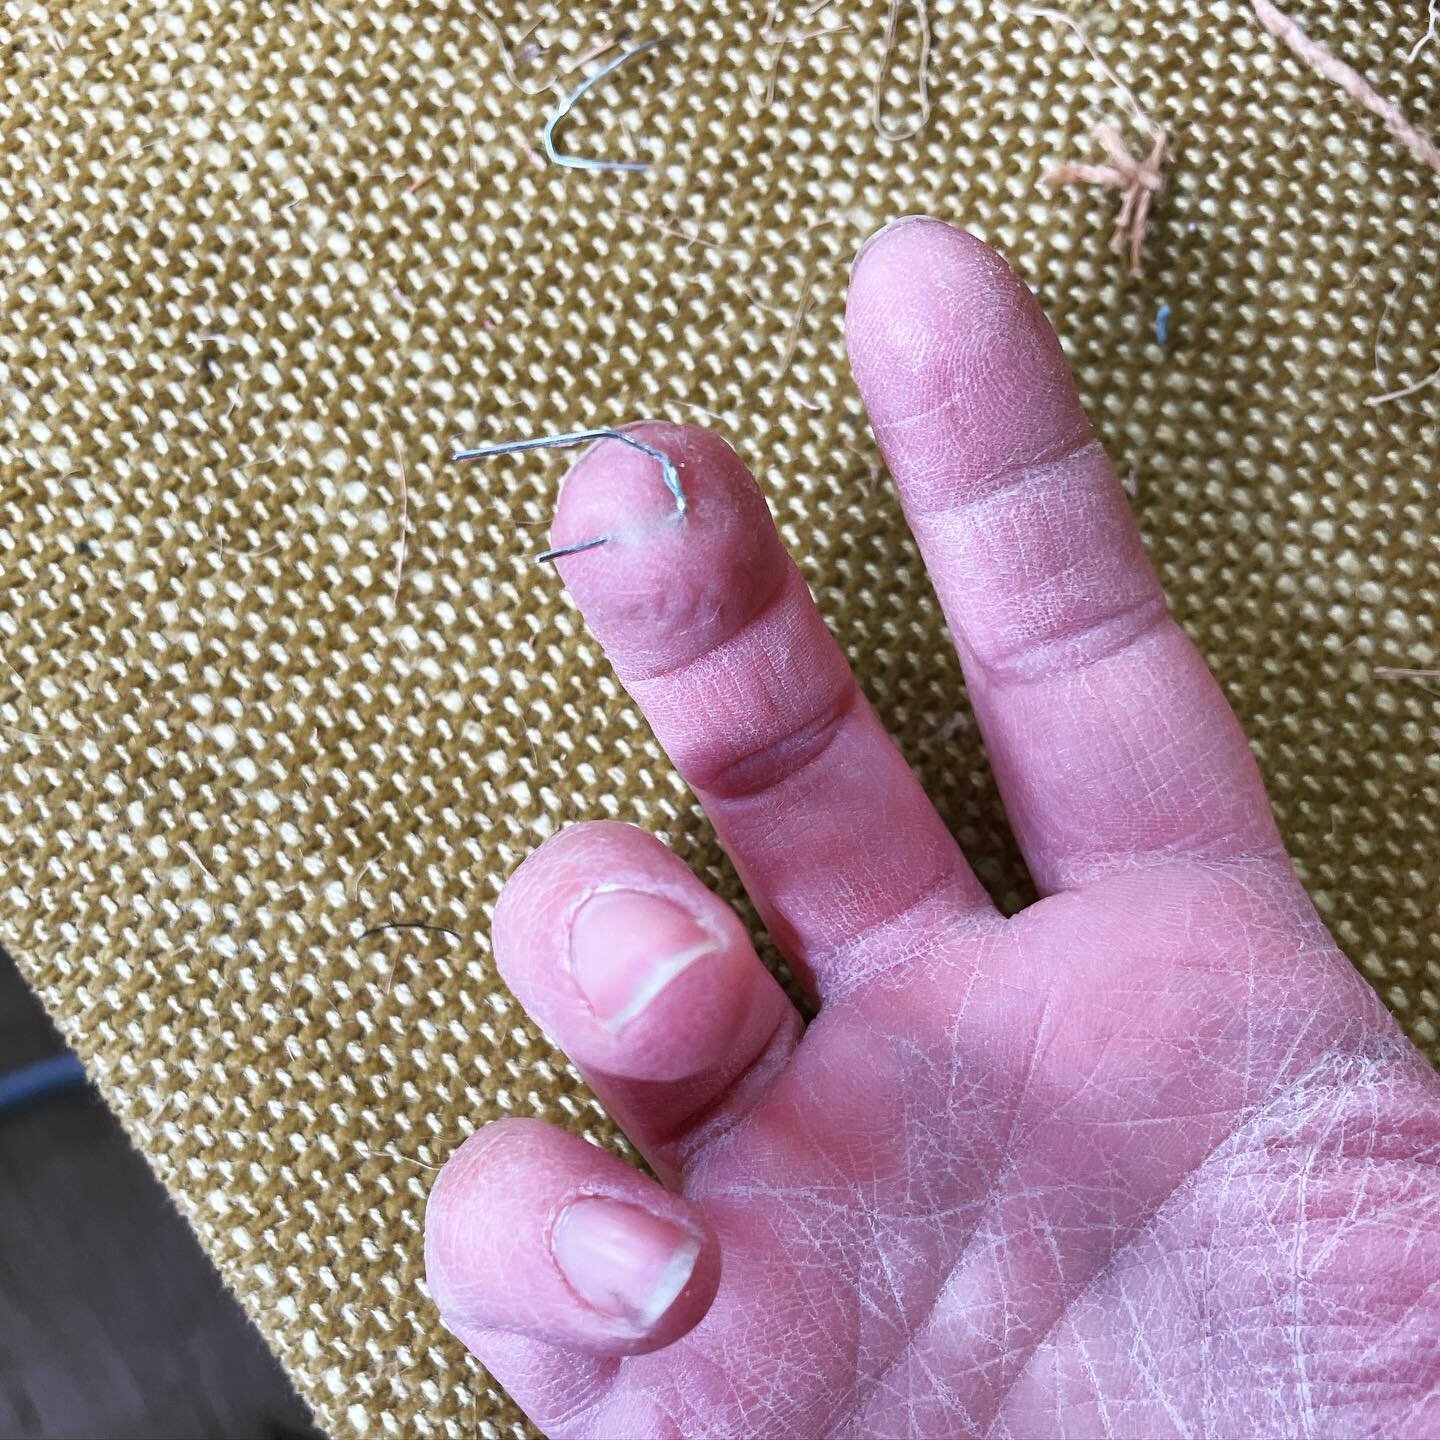 When you&rsquo;re stripping out chairs and you use your hand and not a brush to wipe away the debris #schoolgirlerror #upholstery #upholsteryworkshop #traditionalupholstery #firstaidkit #staples #chairs #ouch #myrepairshop #dryhands #workinghands #ha